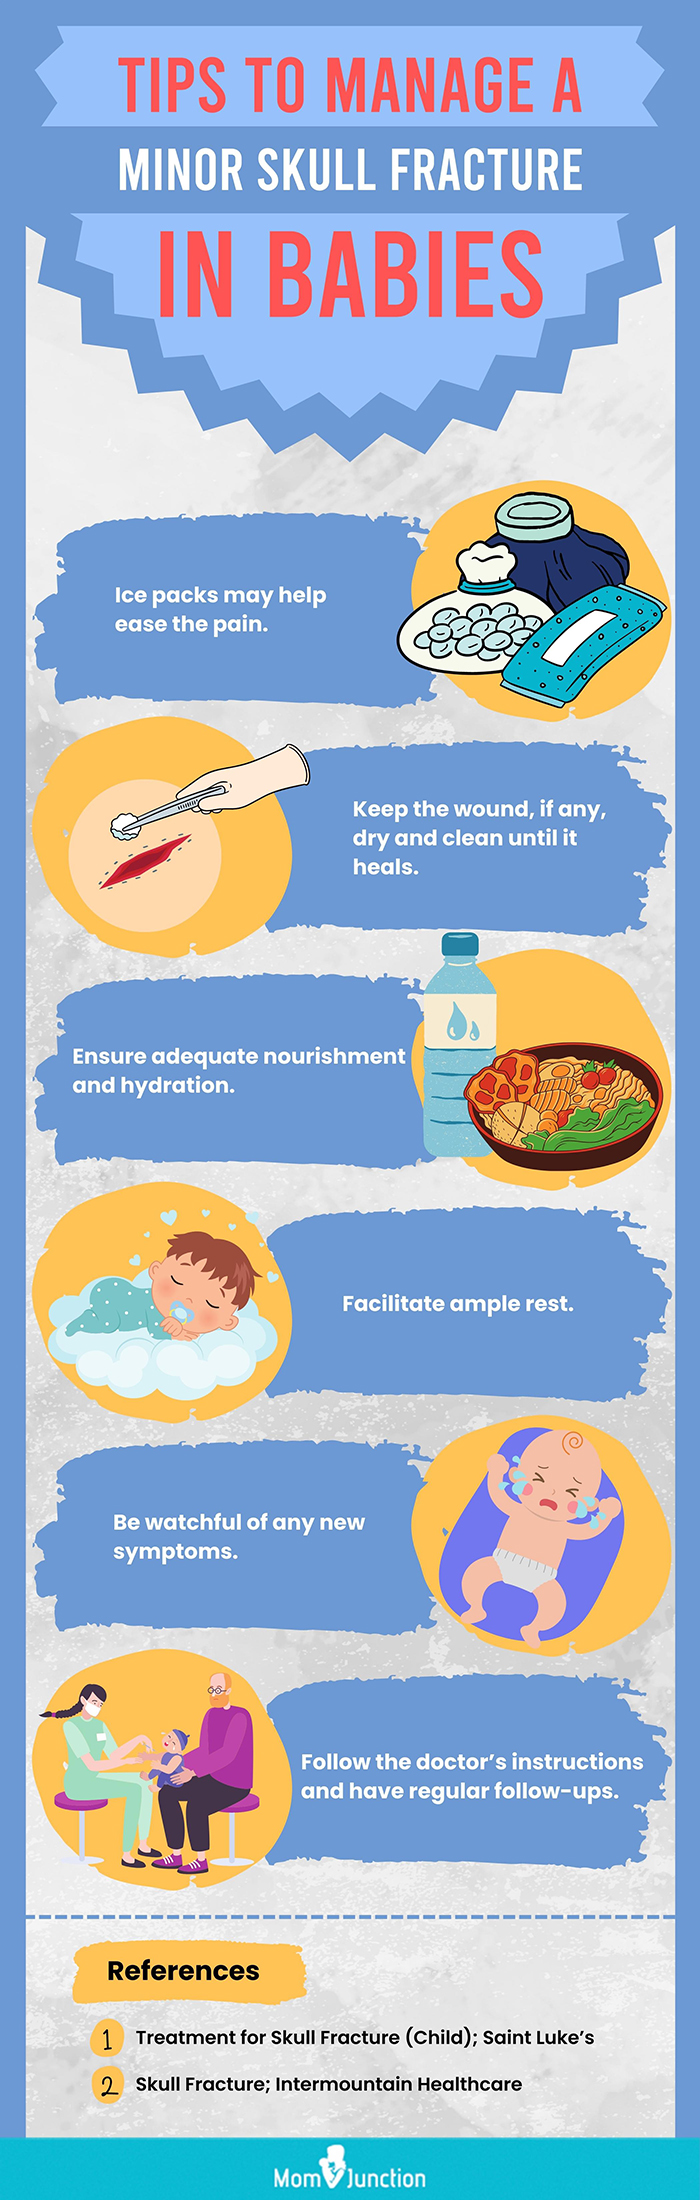 tips to manage a minor skull fracture in babies (infographic)